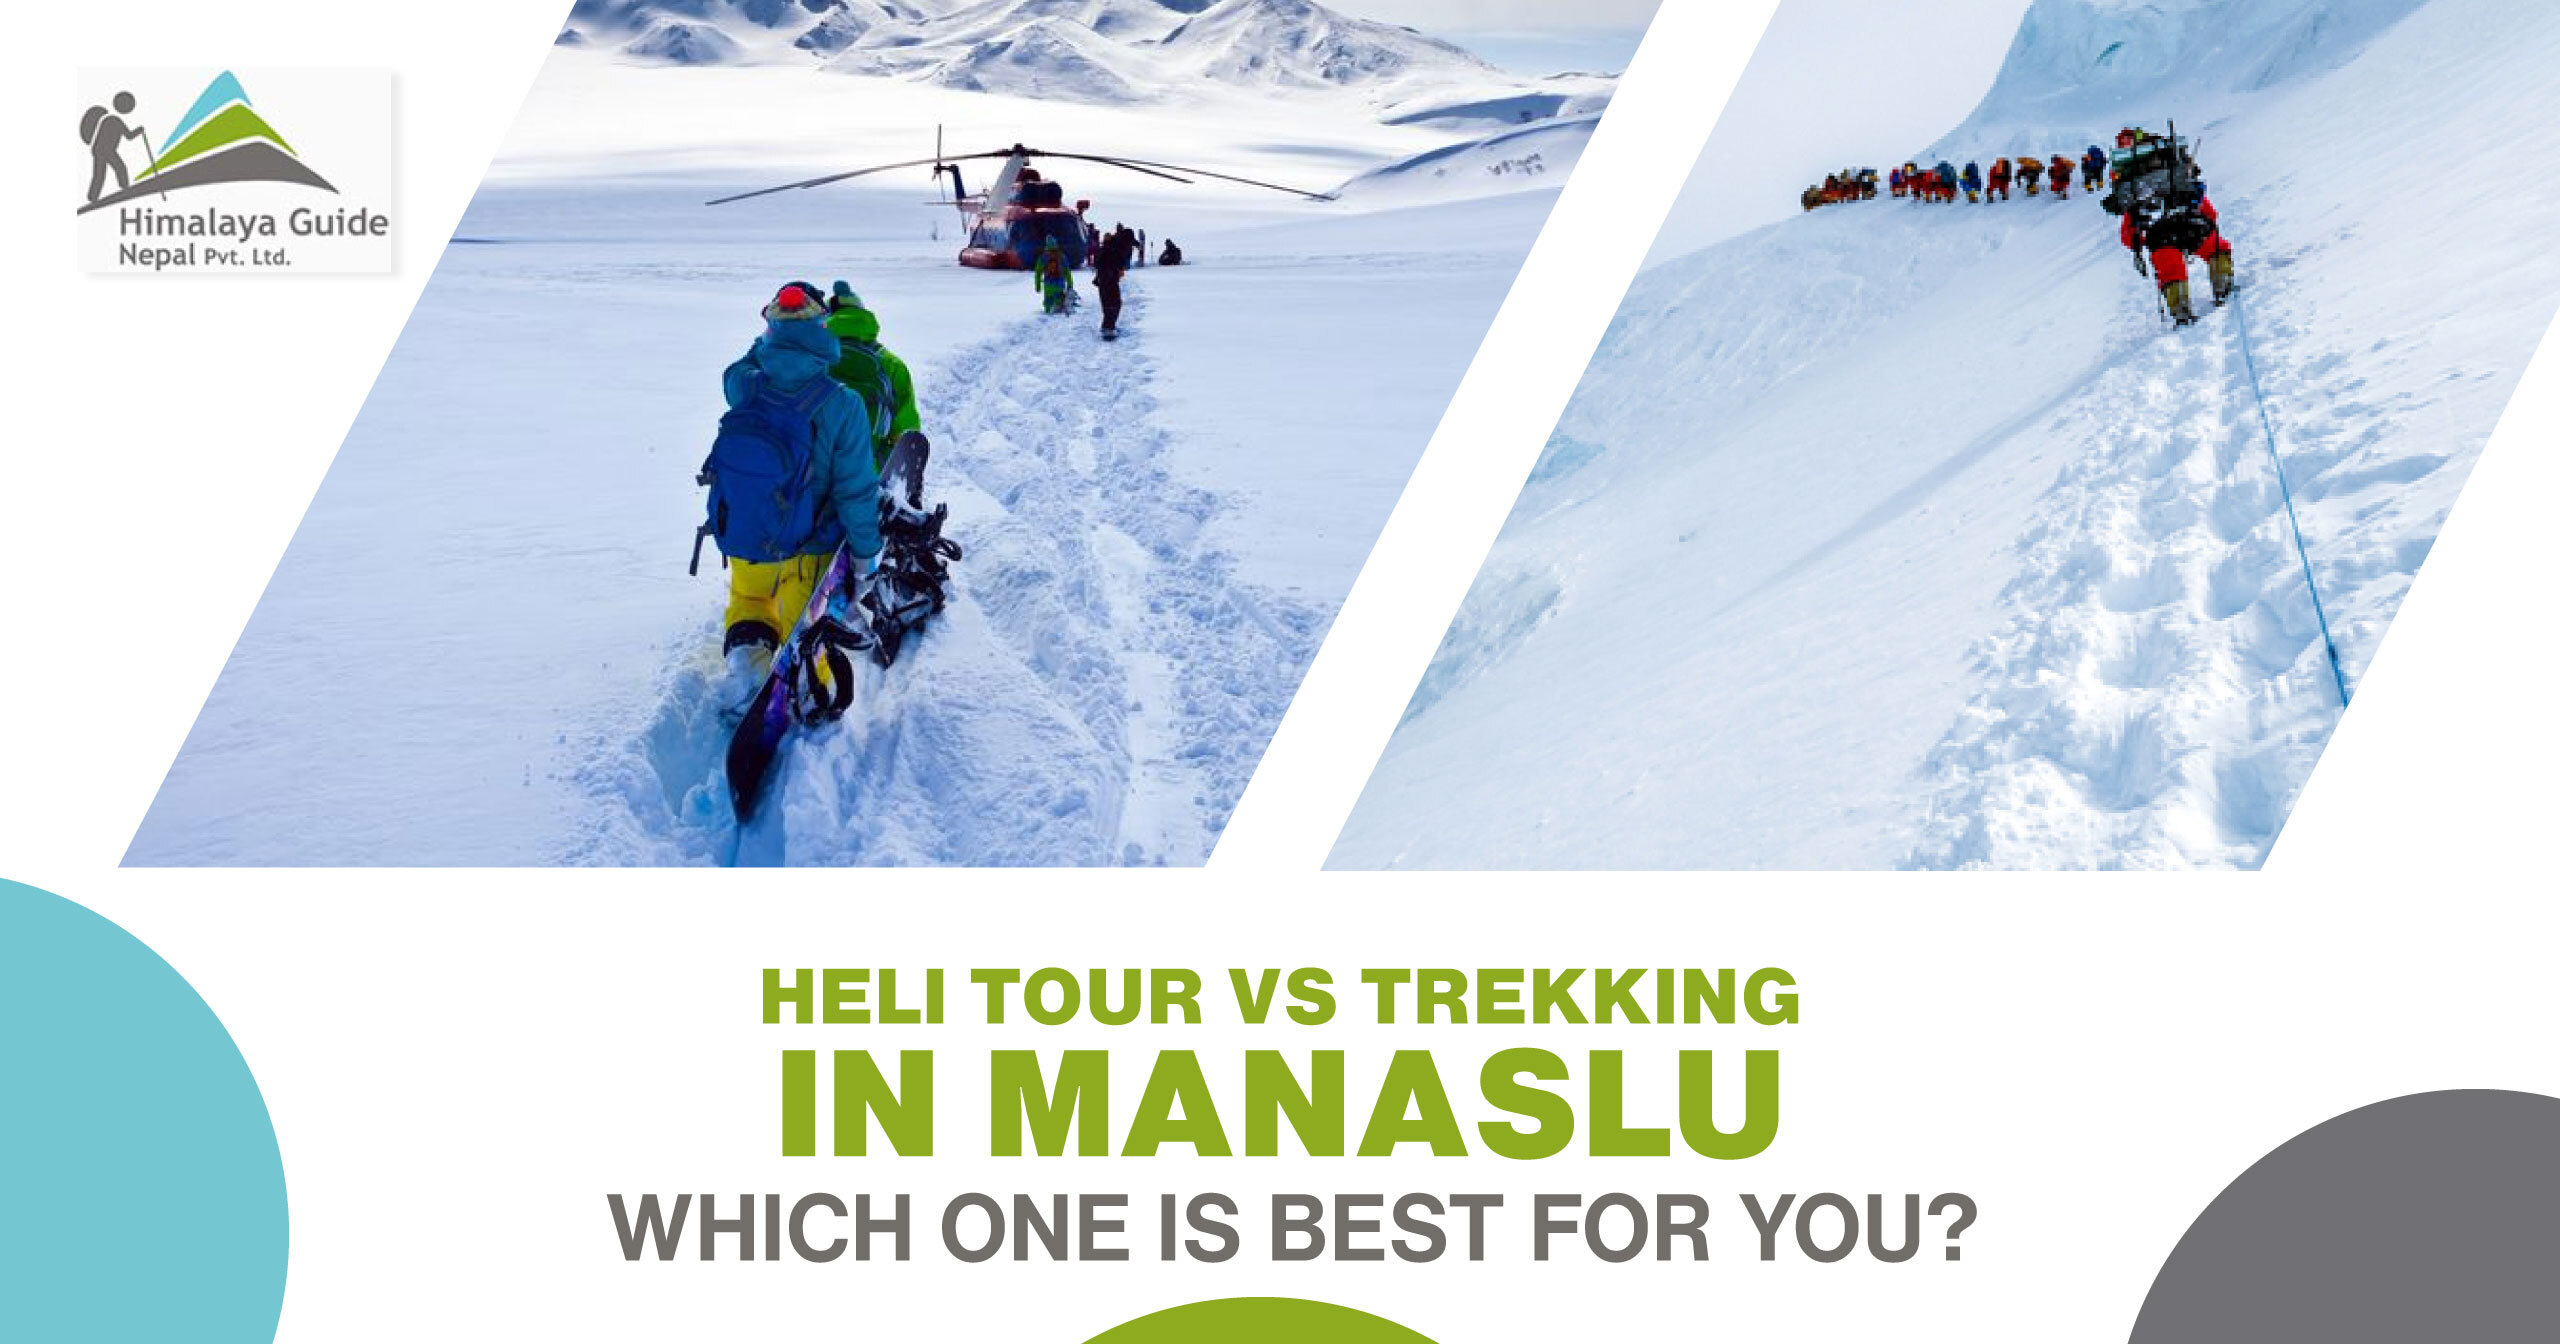 Heli Tour Vs Trekking in Manaslu: Which One is Best for You? 